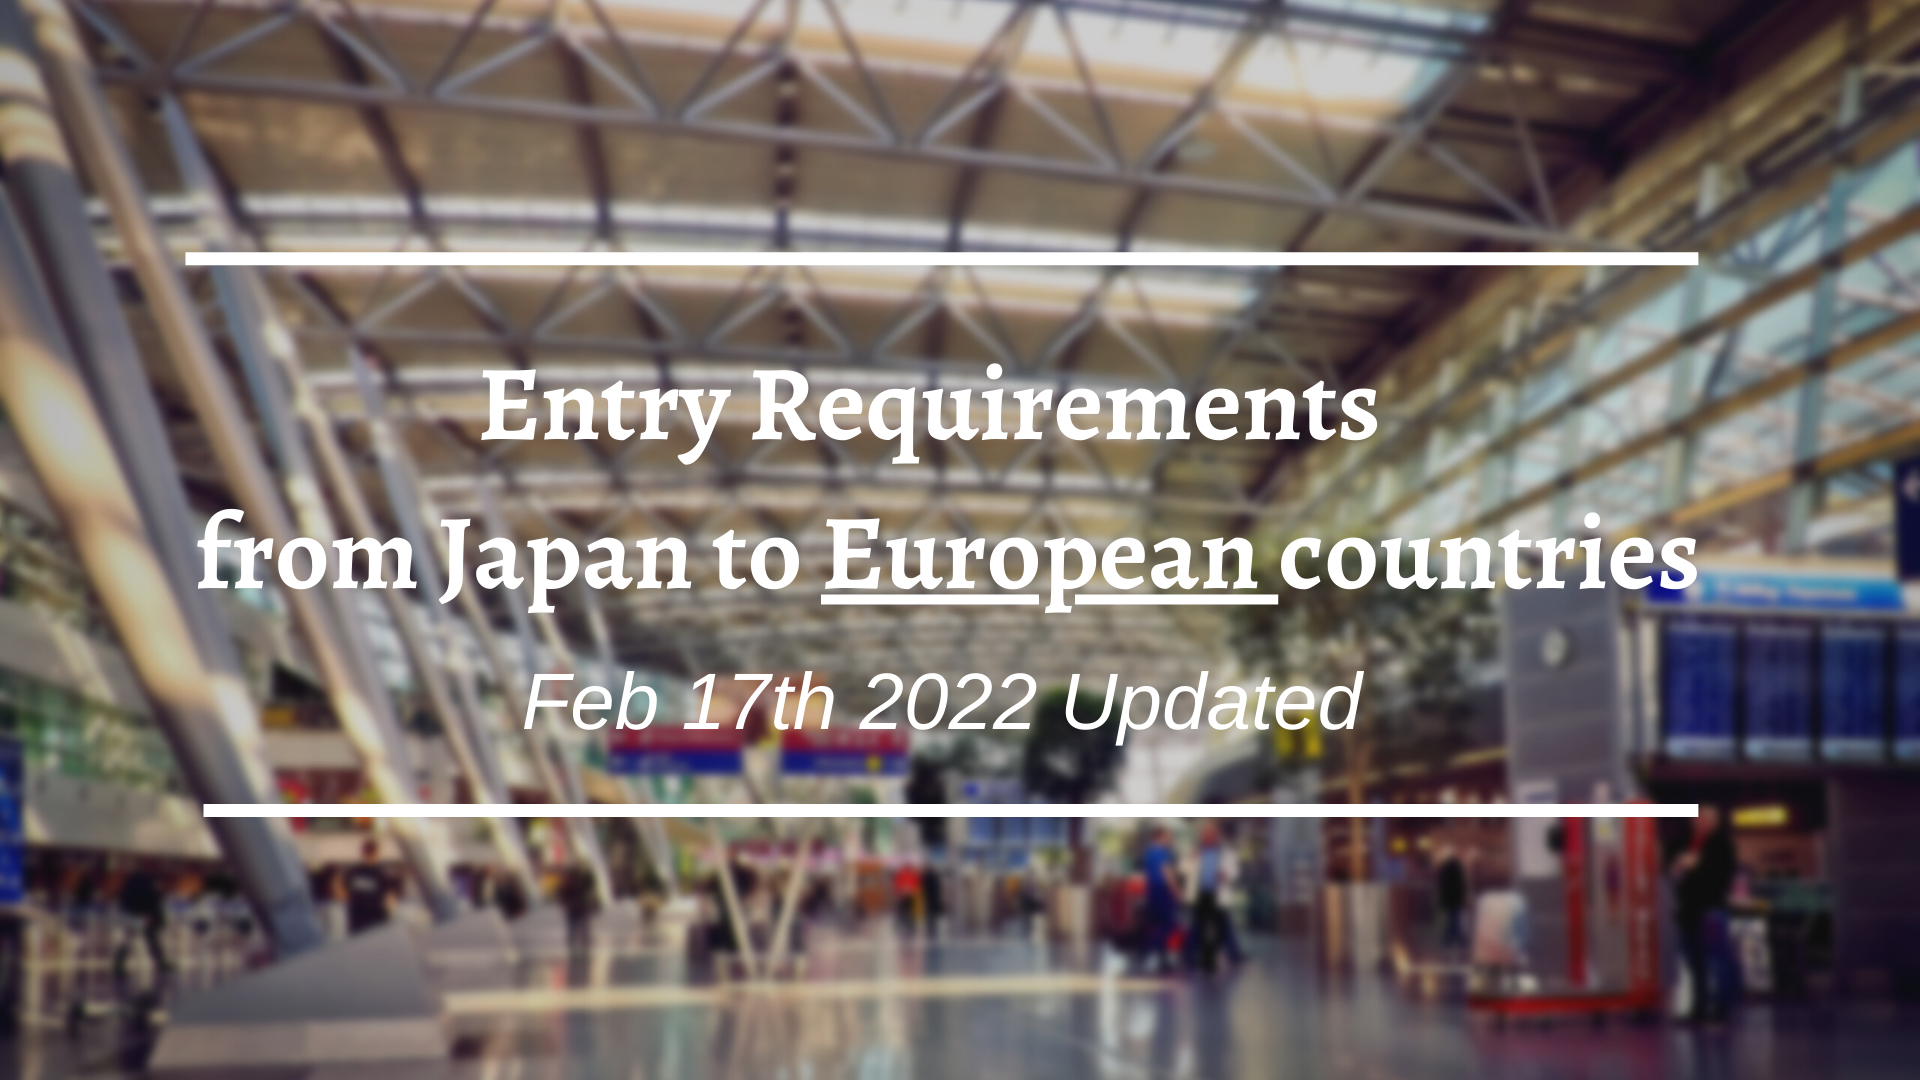 Entry Requirements from Japan to European countries